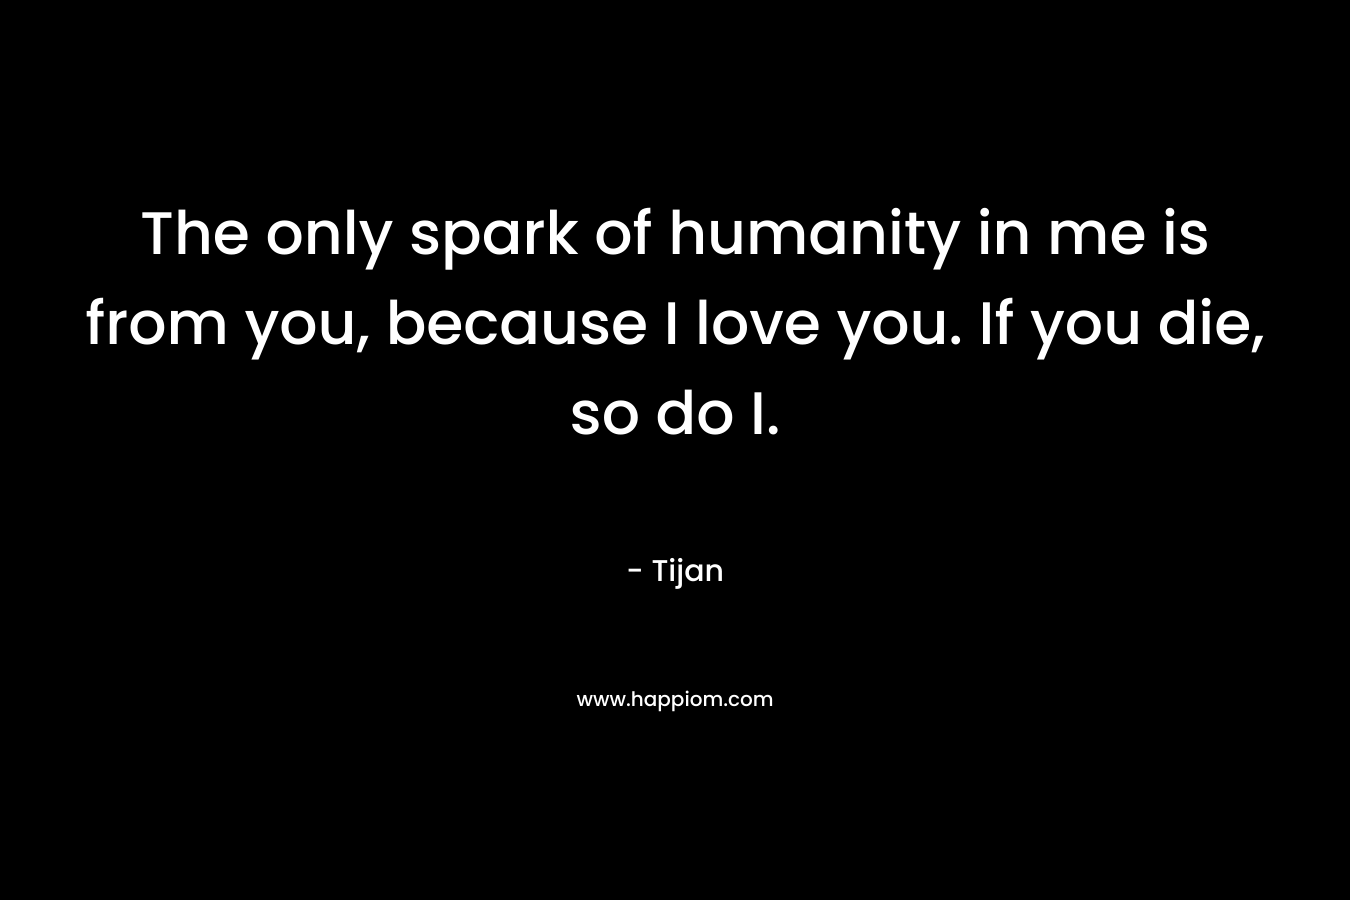 The only spark of humanity in me is from you, because I love you. If you die, so do I. – Tijan